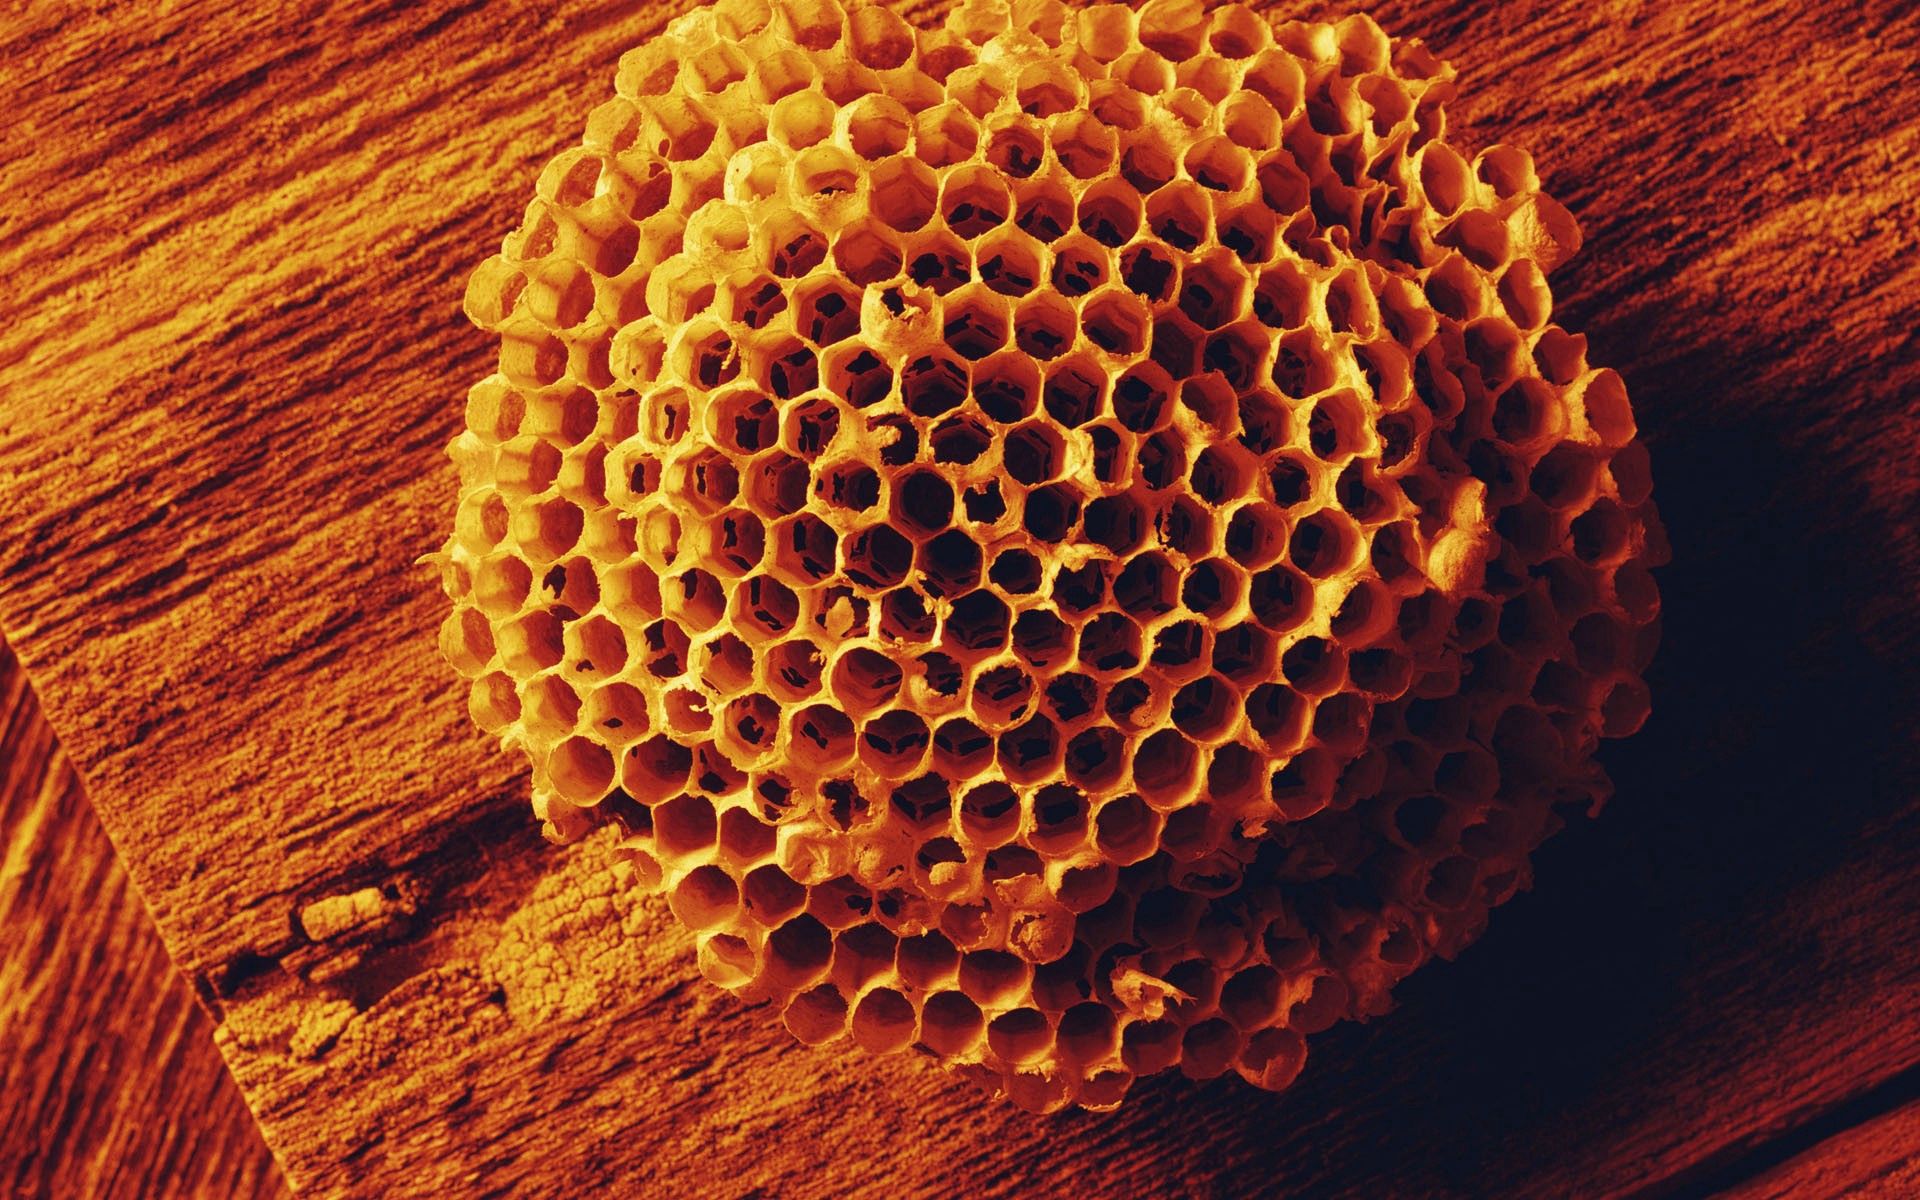 bees, miscellanea, miscellaneous, surface, form, honey, honeycomb